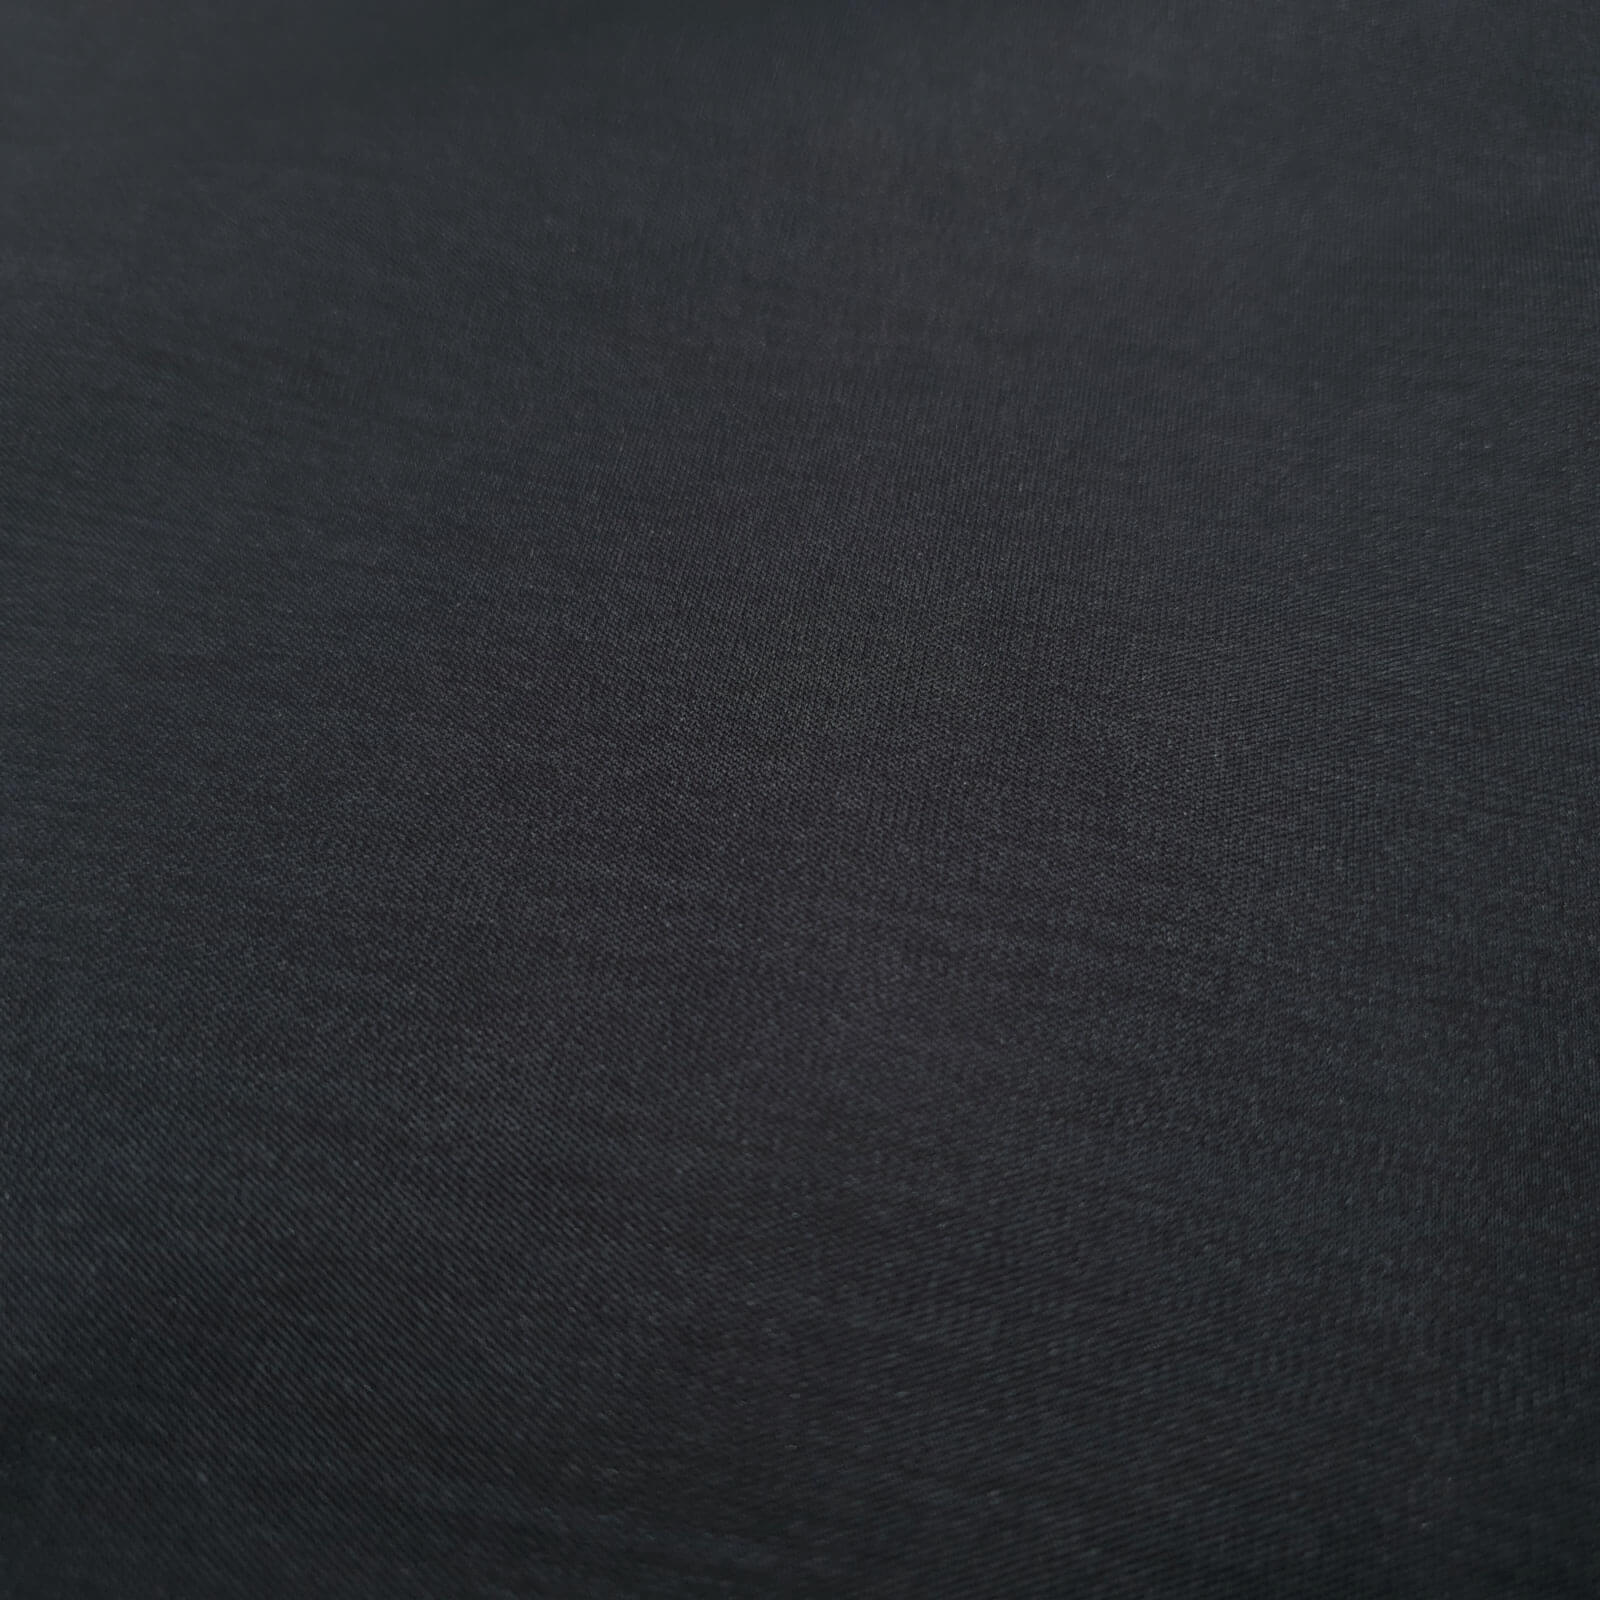 Inola - Sympatex® outer fabric laminate with climate membrane - Navy-Black Mottled